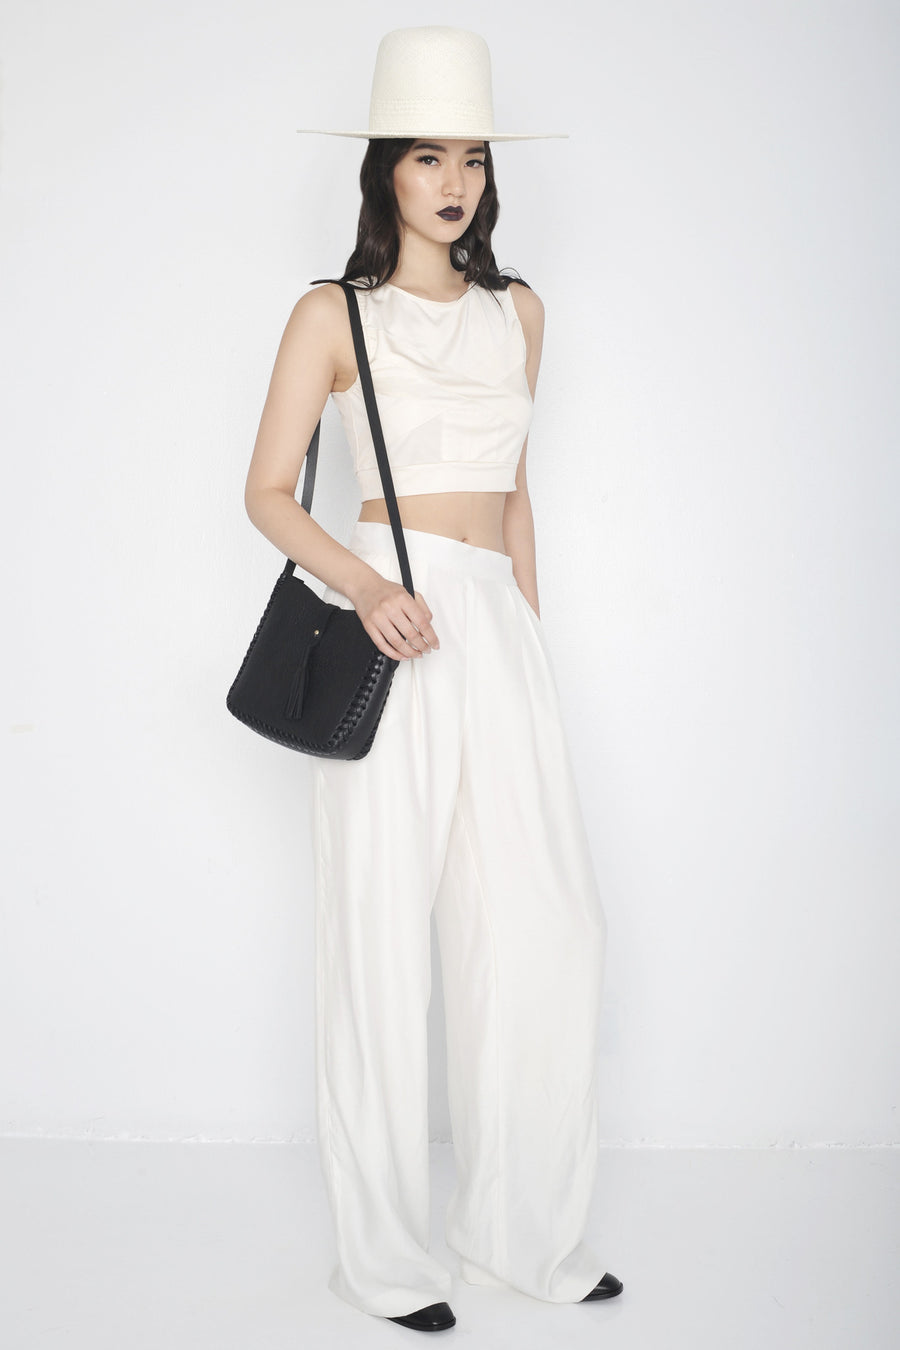 Mona IMG Model Wendy Nichol Clothing Designer Ready to Wear Fashion Runway show SS16 Guardians of Light High Noon Silk Mesh Cross Crop Top Sleeveless Cream White Silk Pleated Wide Leg Pants High Waisted Handmade in NYC  Custom Tailoring Made to Measure Order